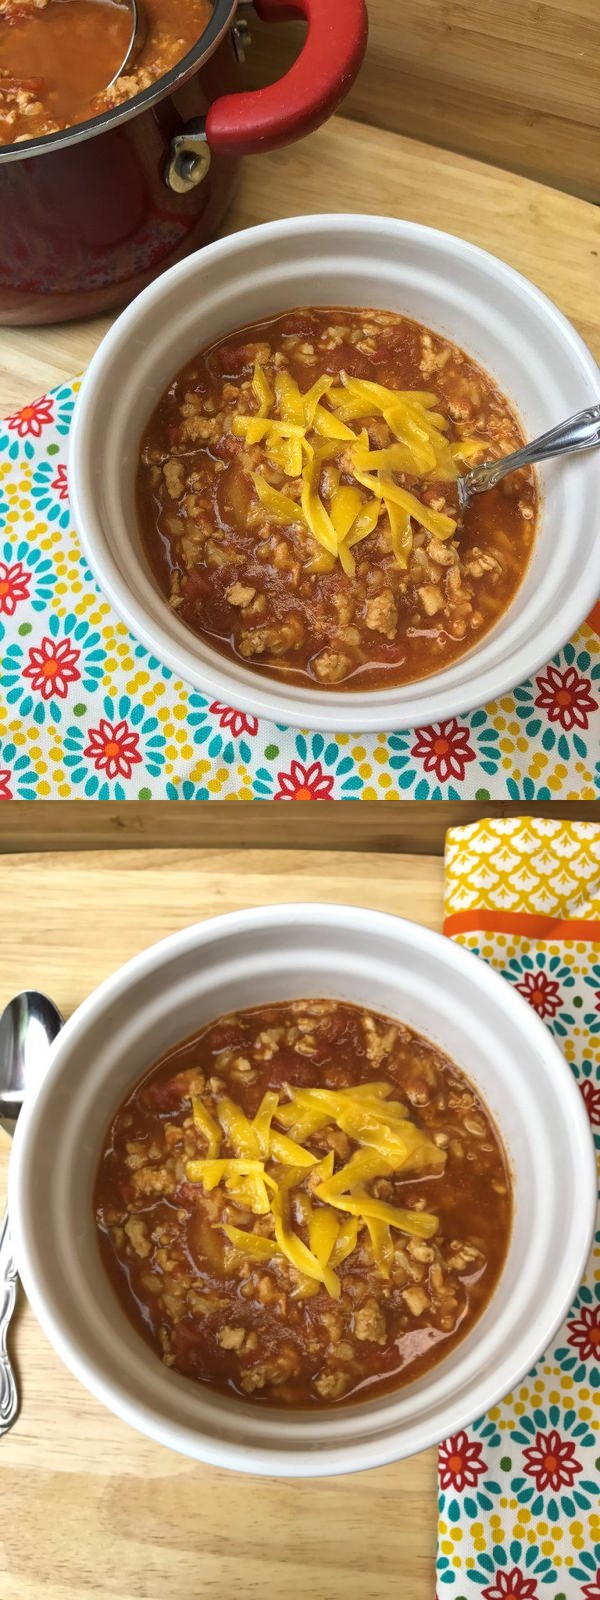 Turkey & Rice Chili without Beans